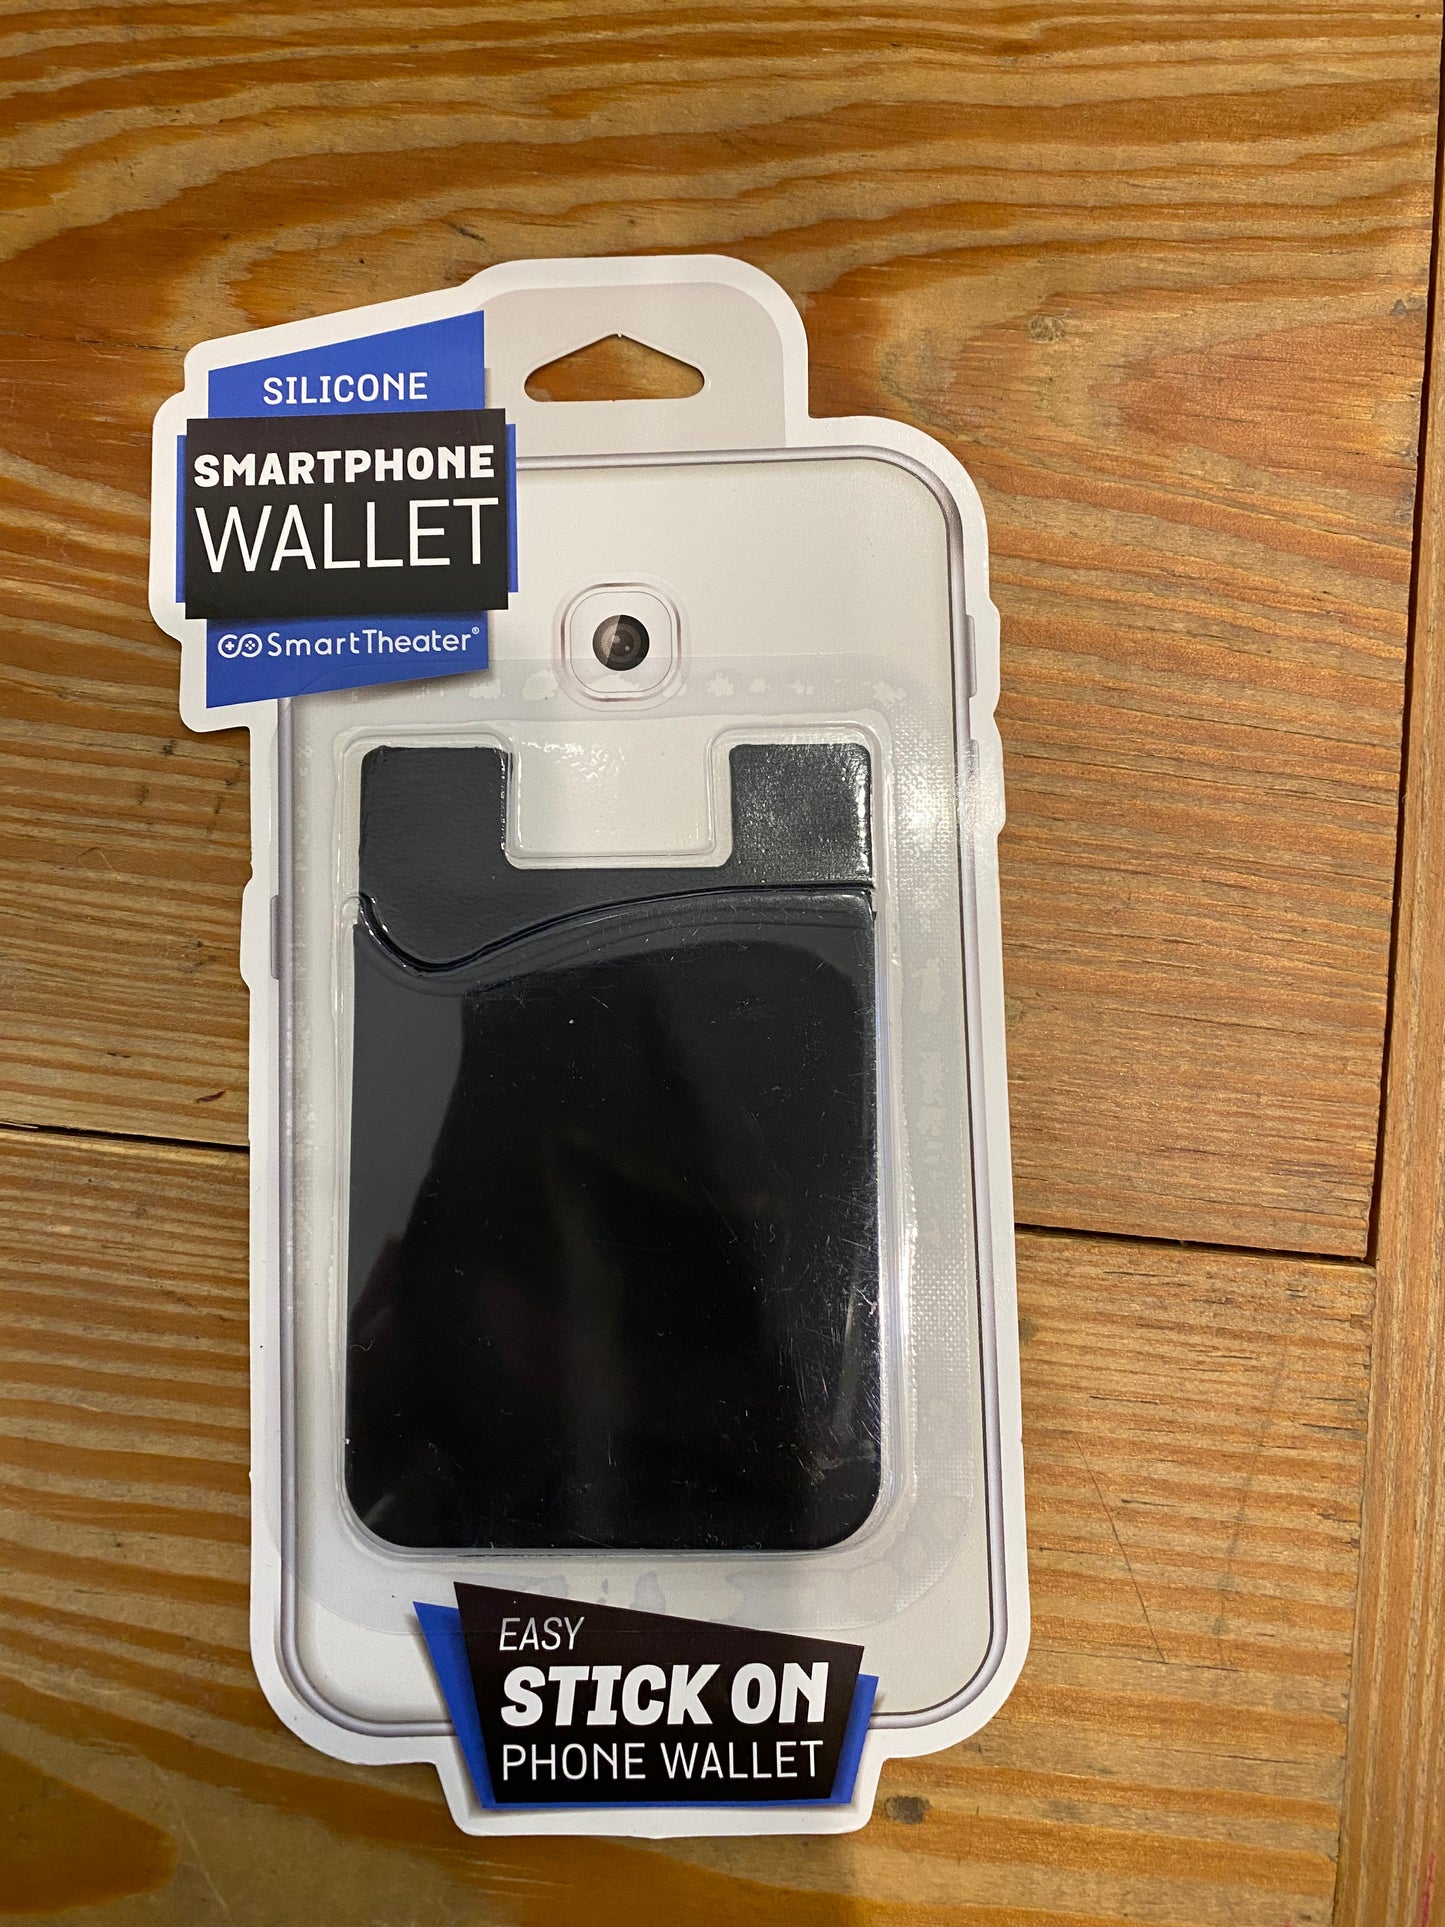 Stick on phone wallet